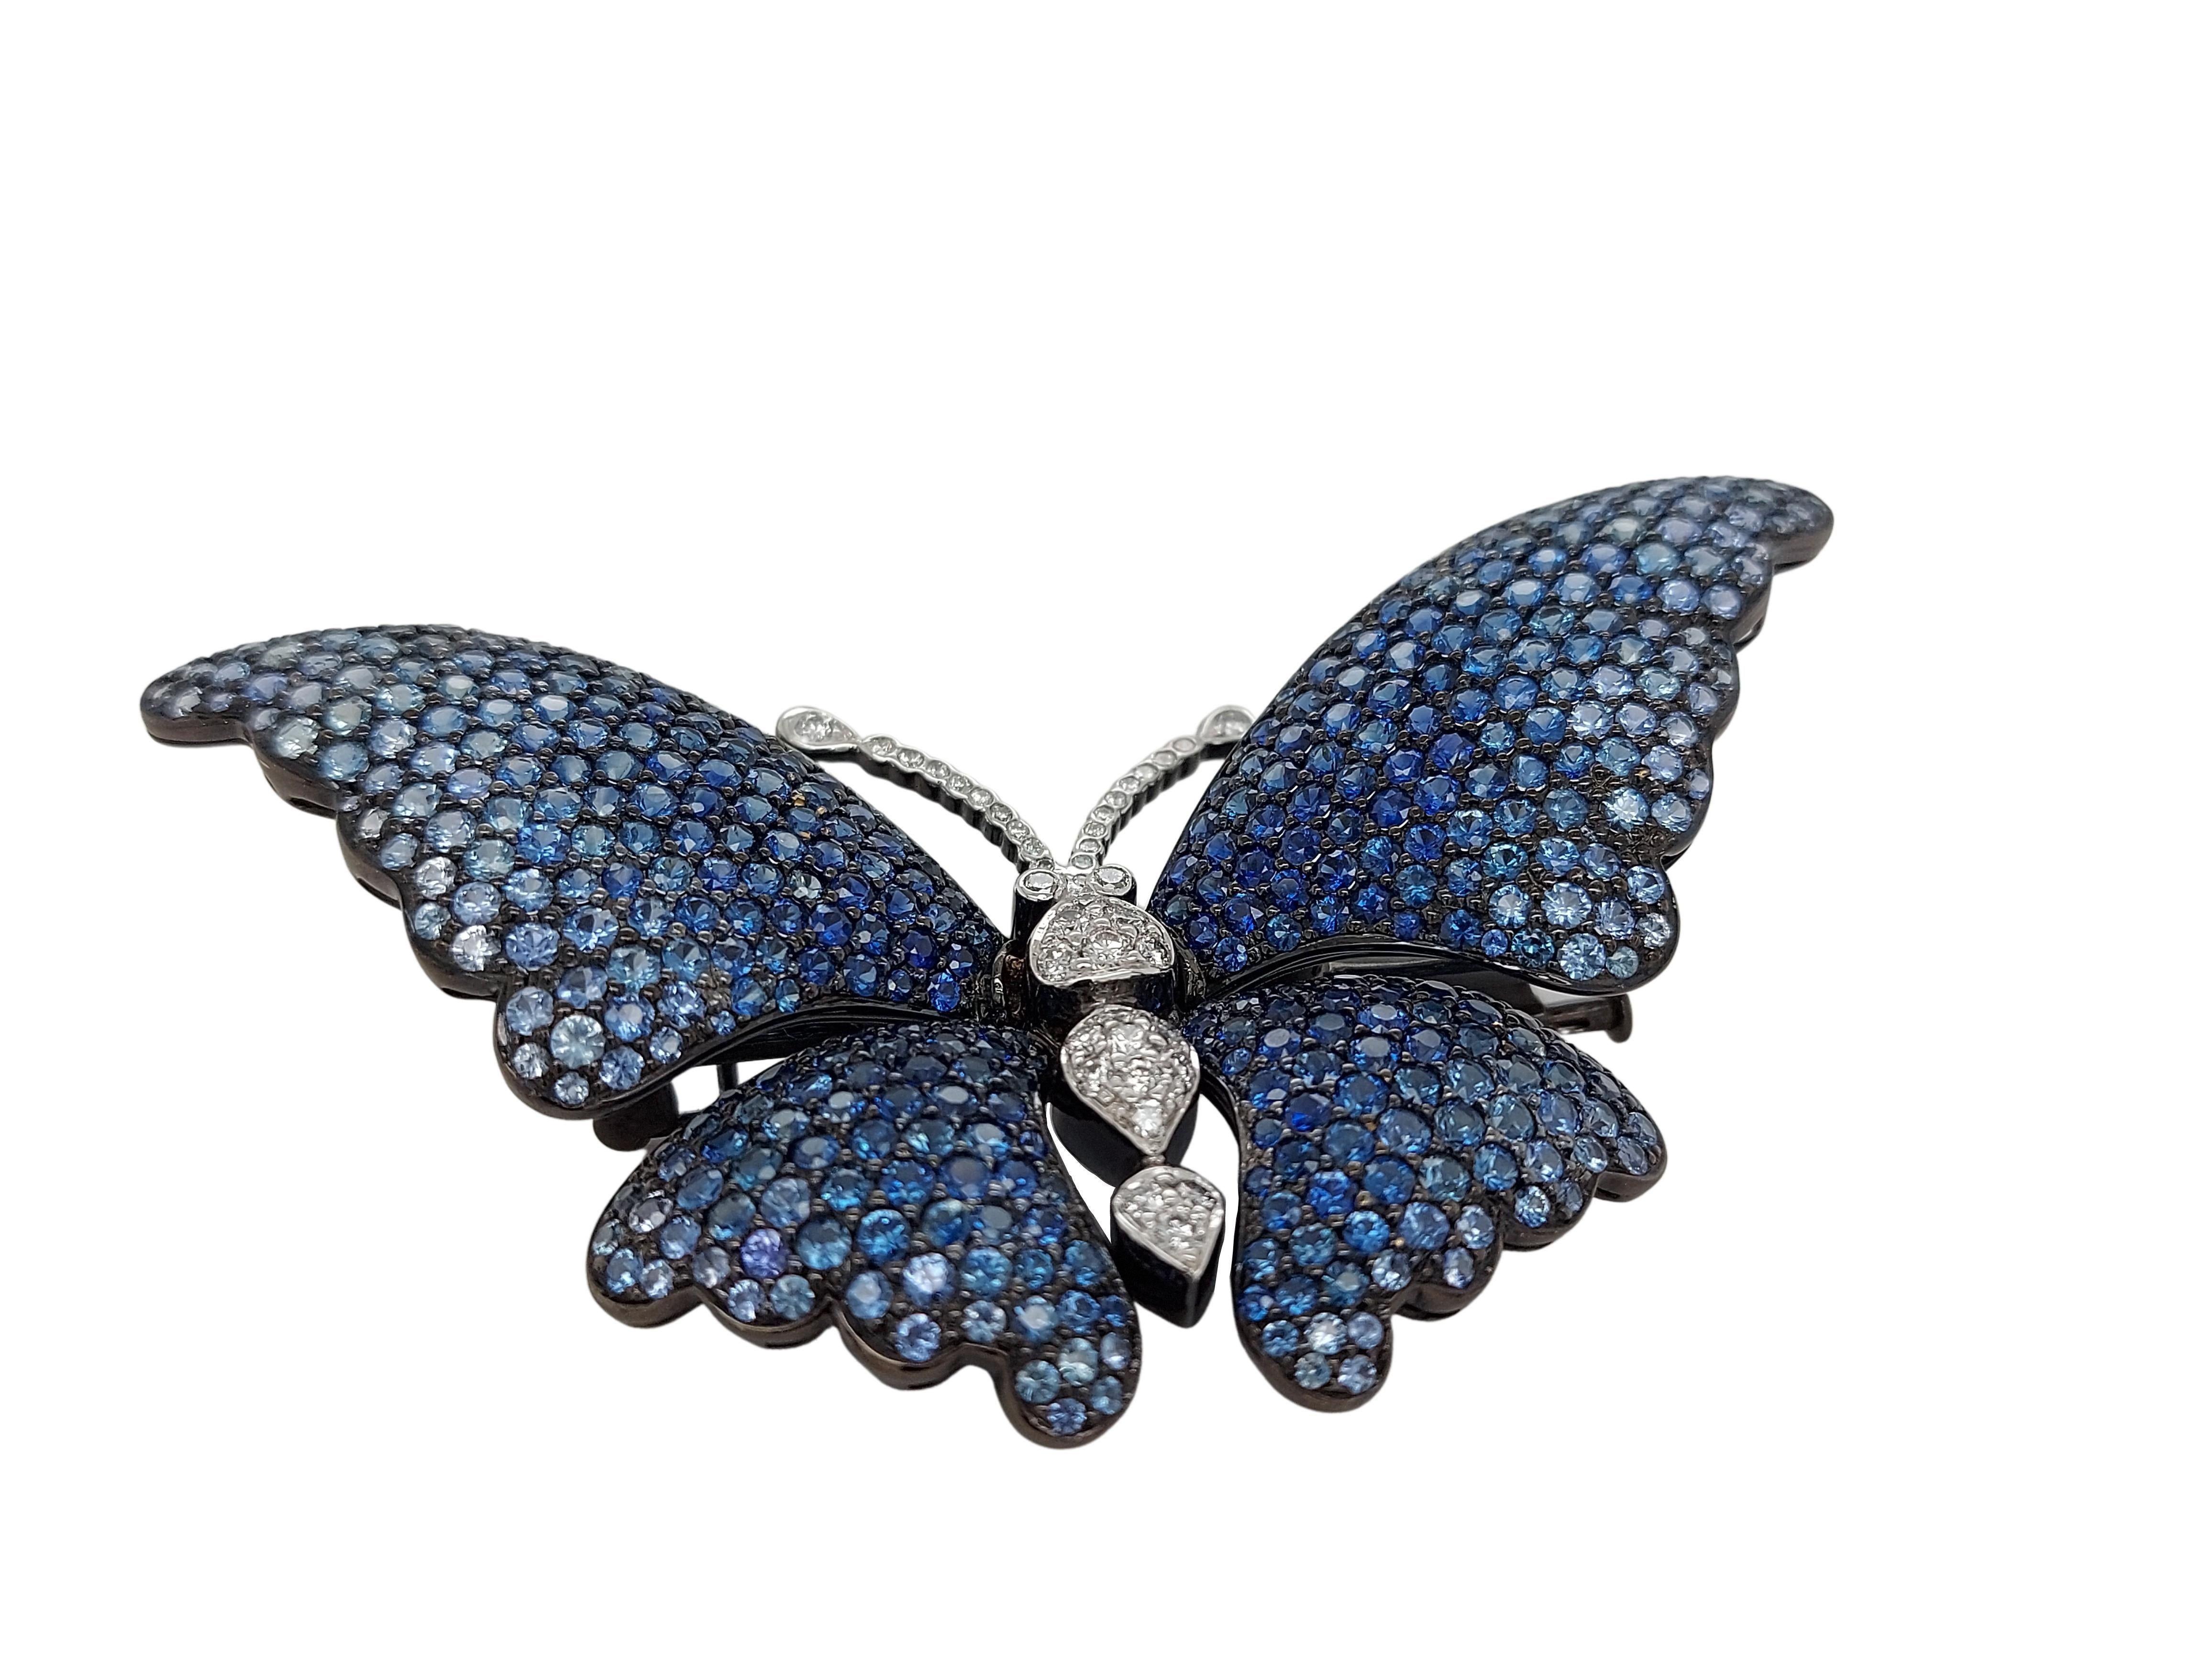 Very Special Butterfly Brooch with 9.55ct Blue Sapphires and 0.62ct Diamonds 

Amazing color shades from light to dark.

One of a kind piece of art by our goldsmith and diamond setter.

Diamonds: brilliant cut diamonds, together 0.62ct

Sapphires: